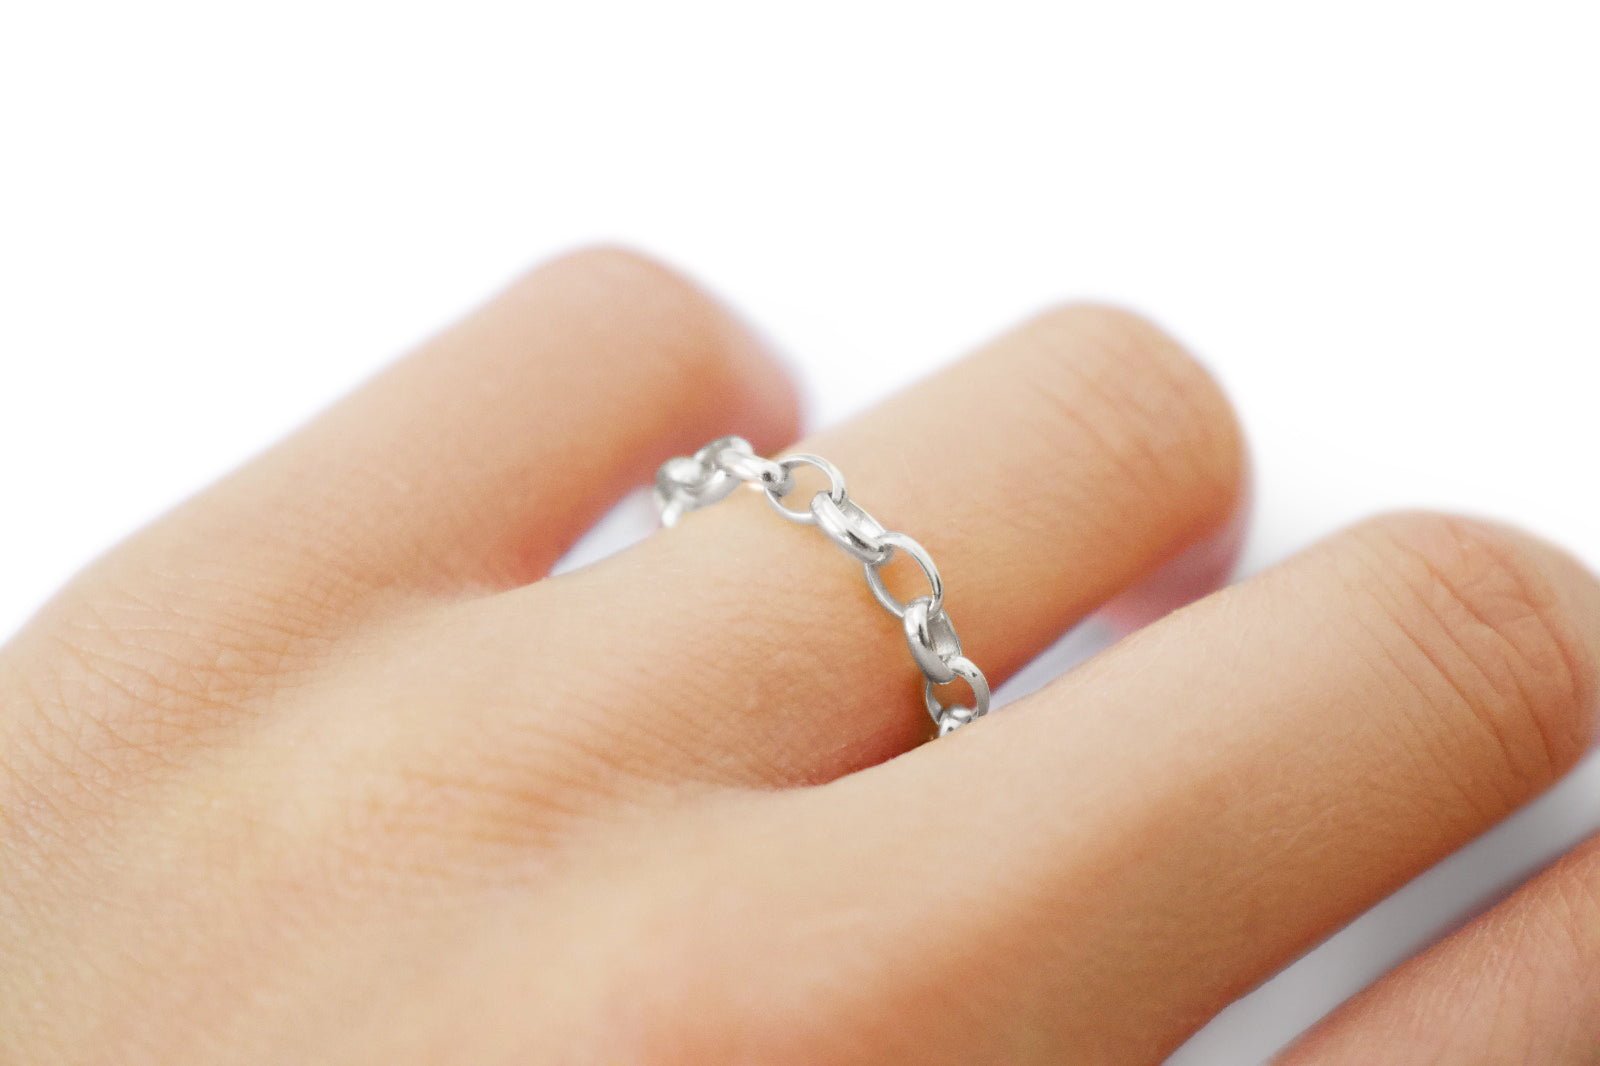 Silver chain ring. Chain ring. Silver ring. Belcher chain. Staple ring. Silver chain. Serena Ansell Jewellery.